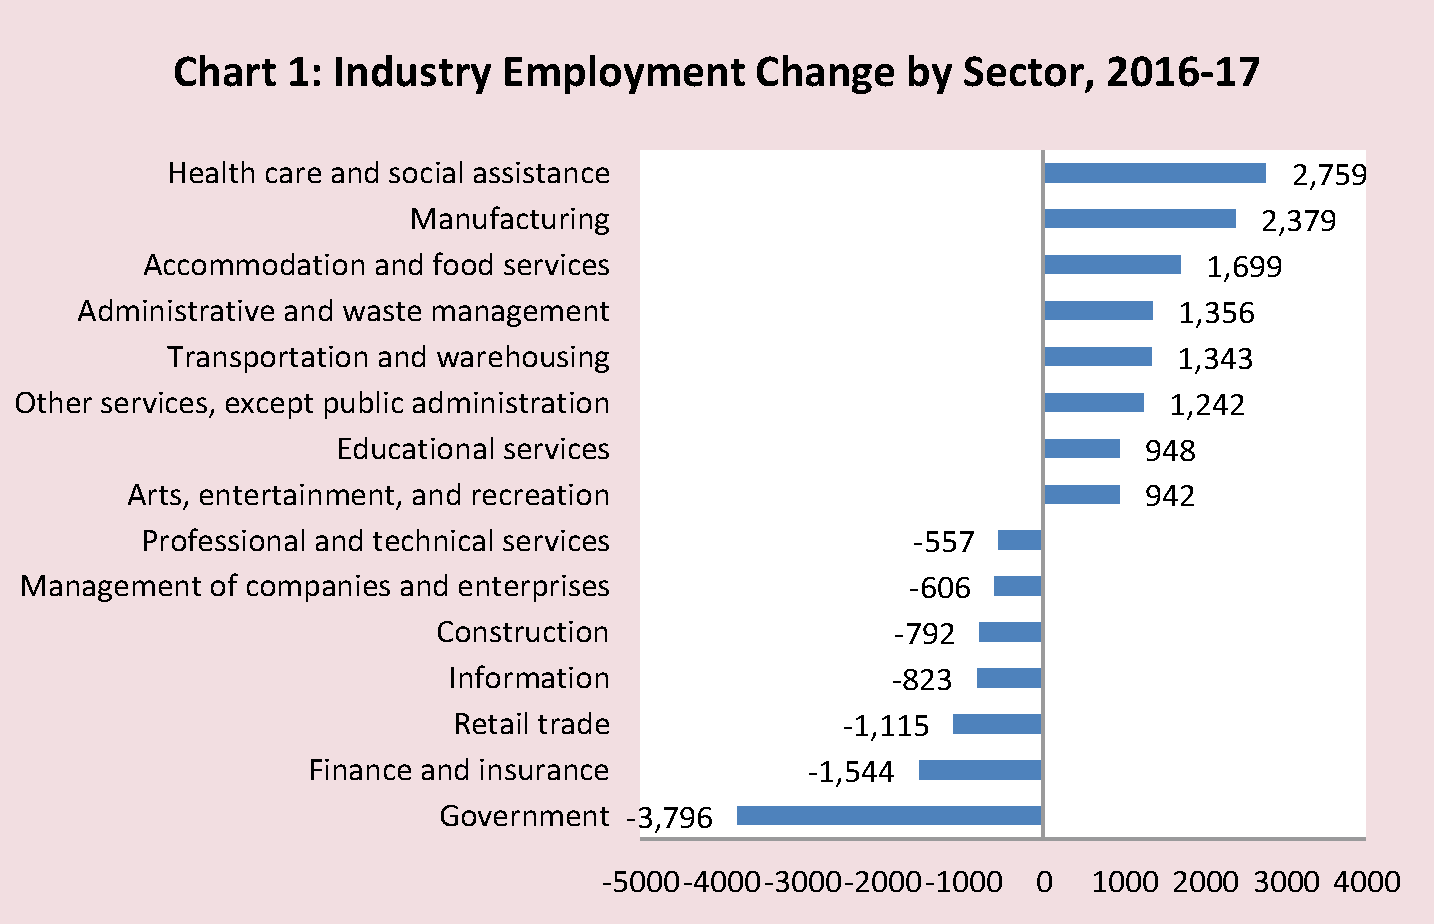 Chart 1. Industry Employment Change by Sector, 2016-17